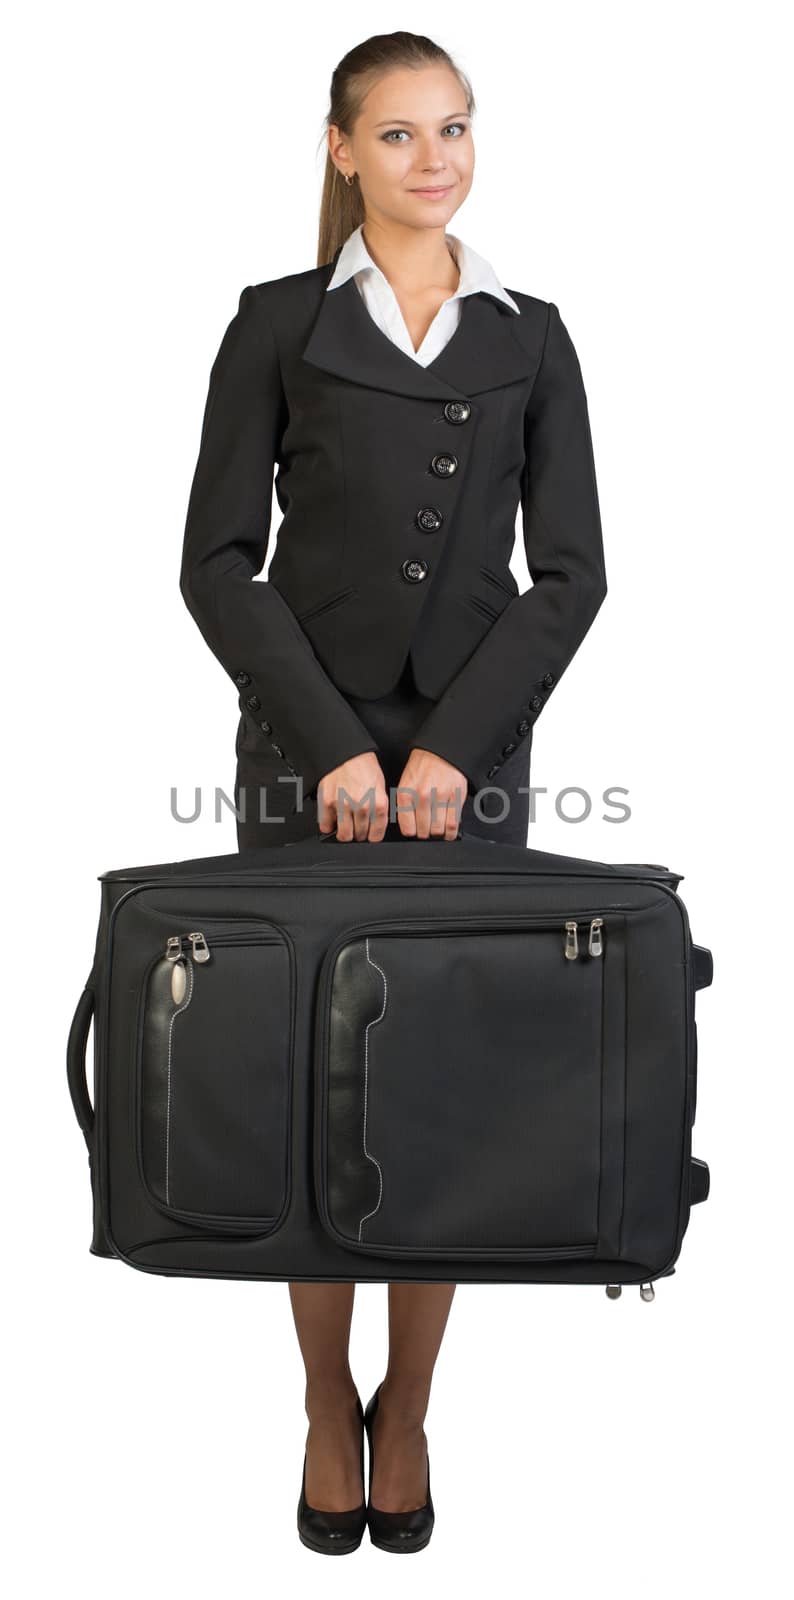 Businesswoman holding suitcase, looking at camera, smiling by cherezoff